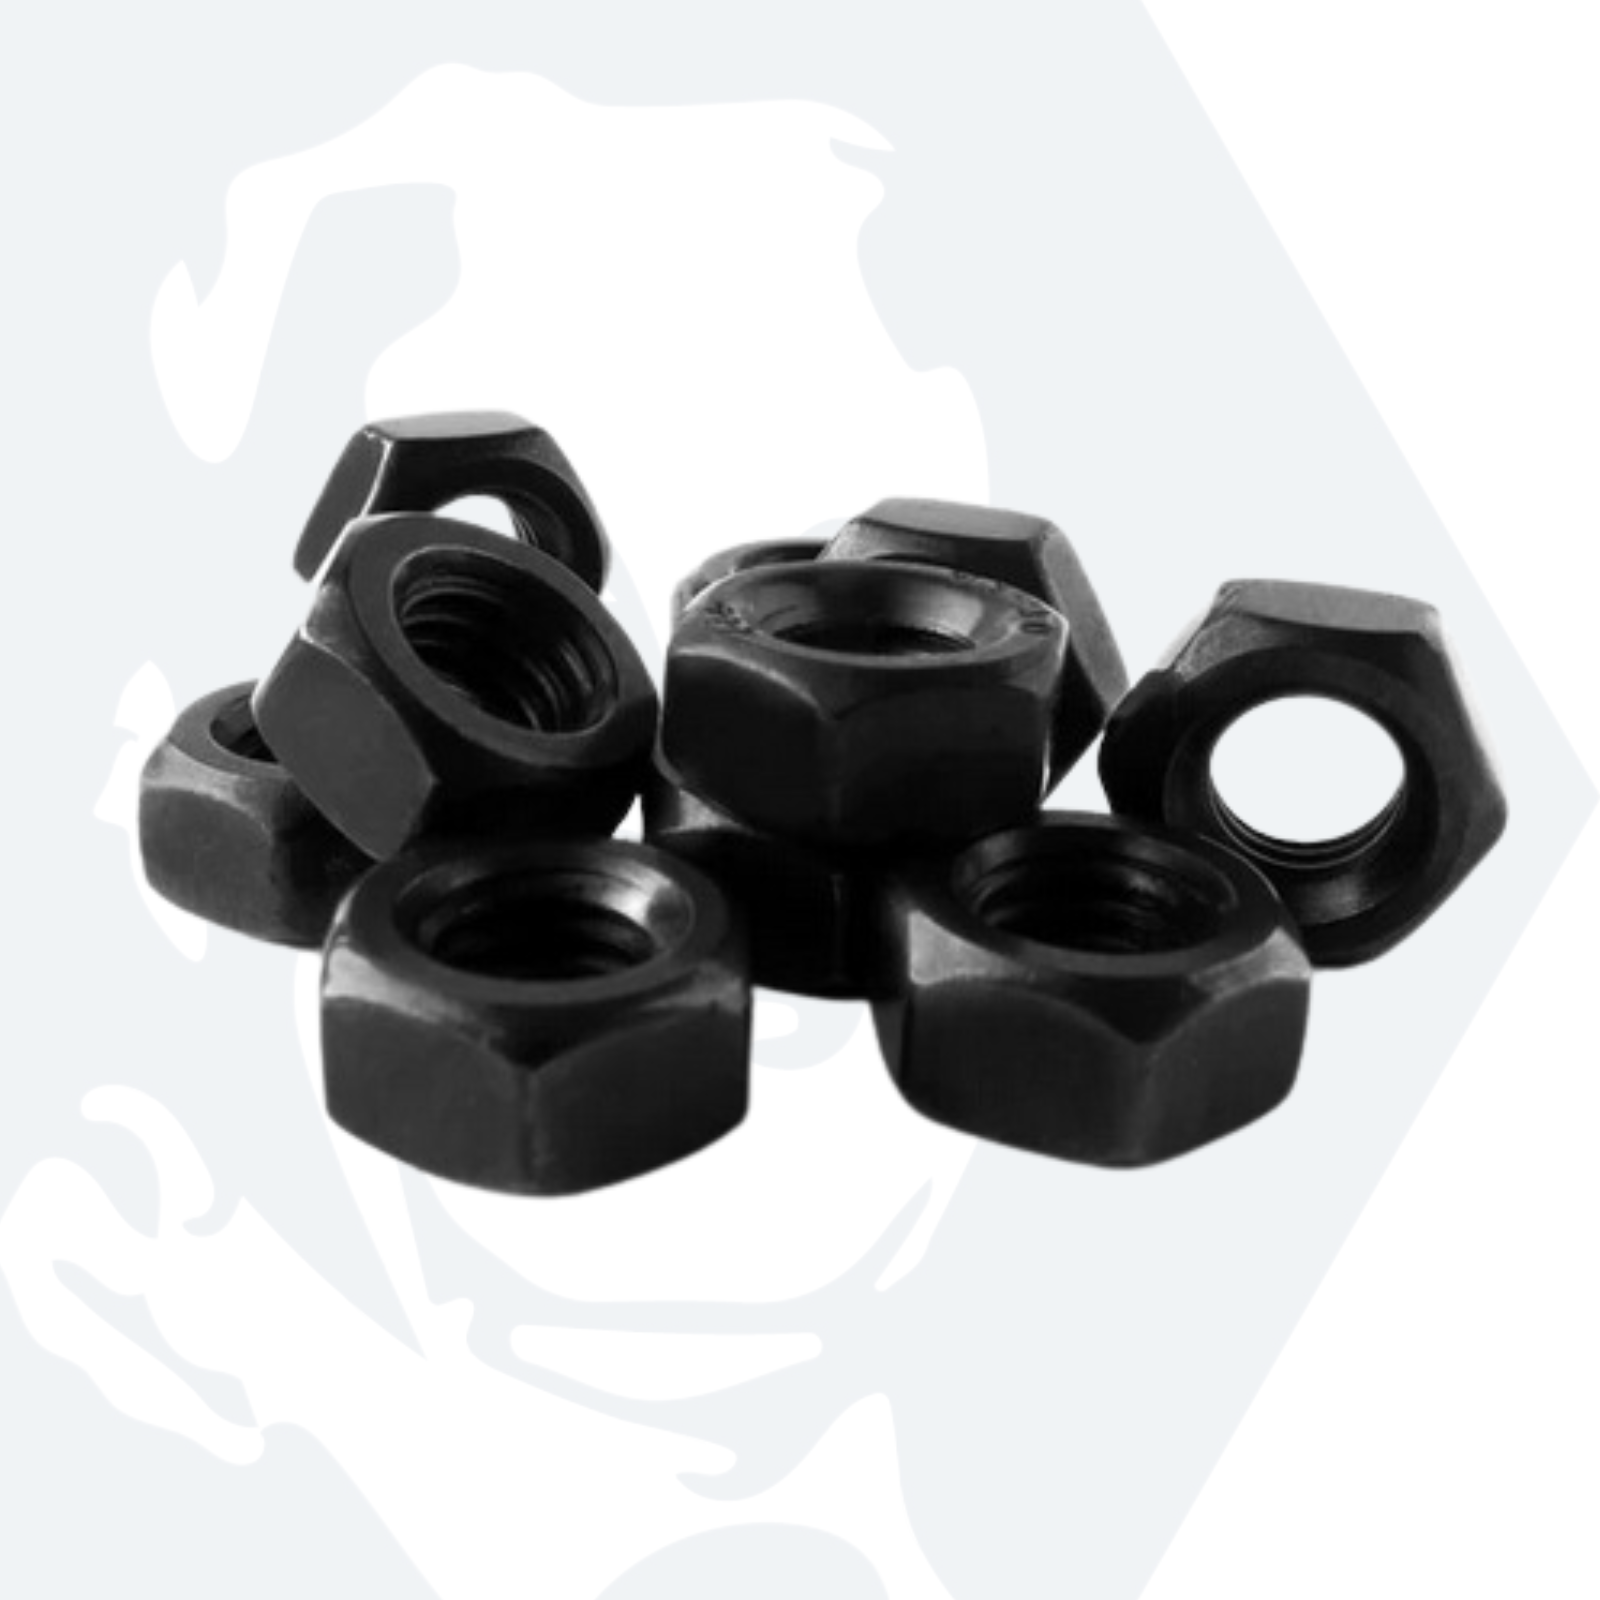 M10 Hexagon Nuts (DIN 934) - Black Stainless Steel (A2)